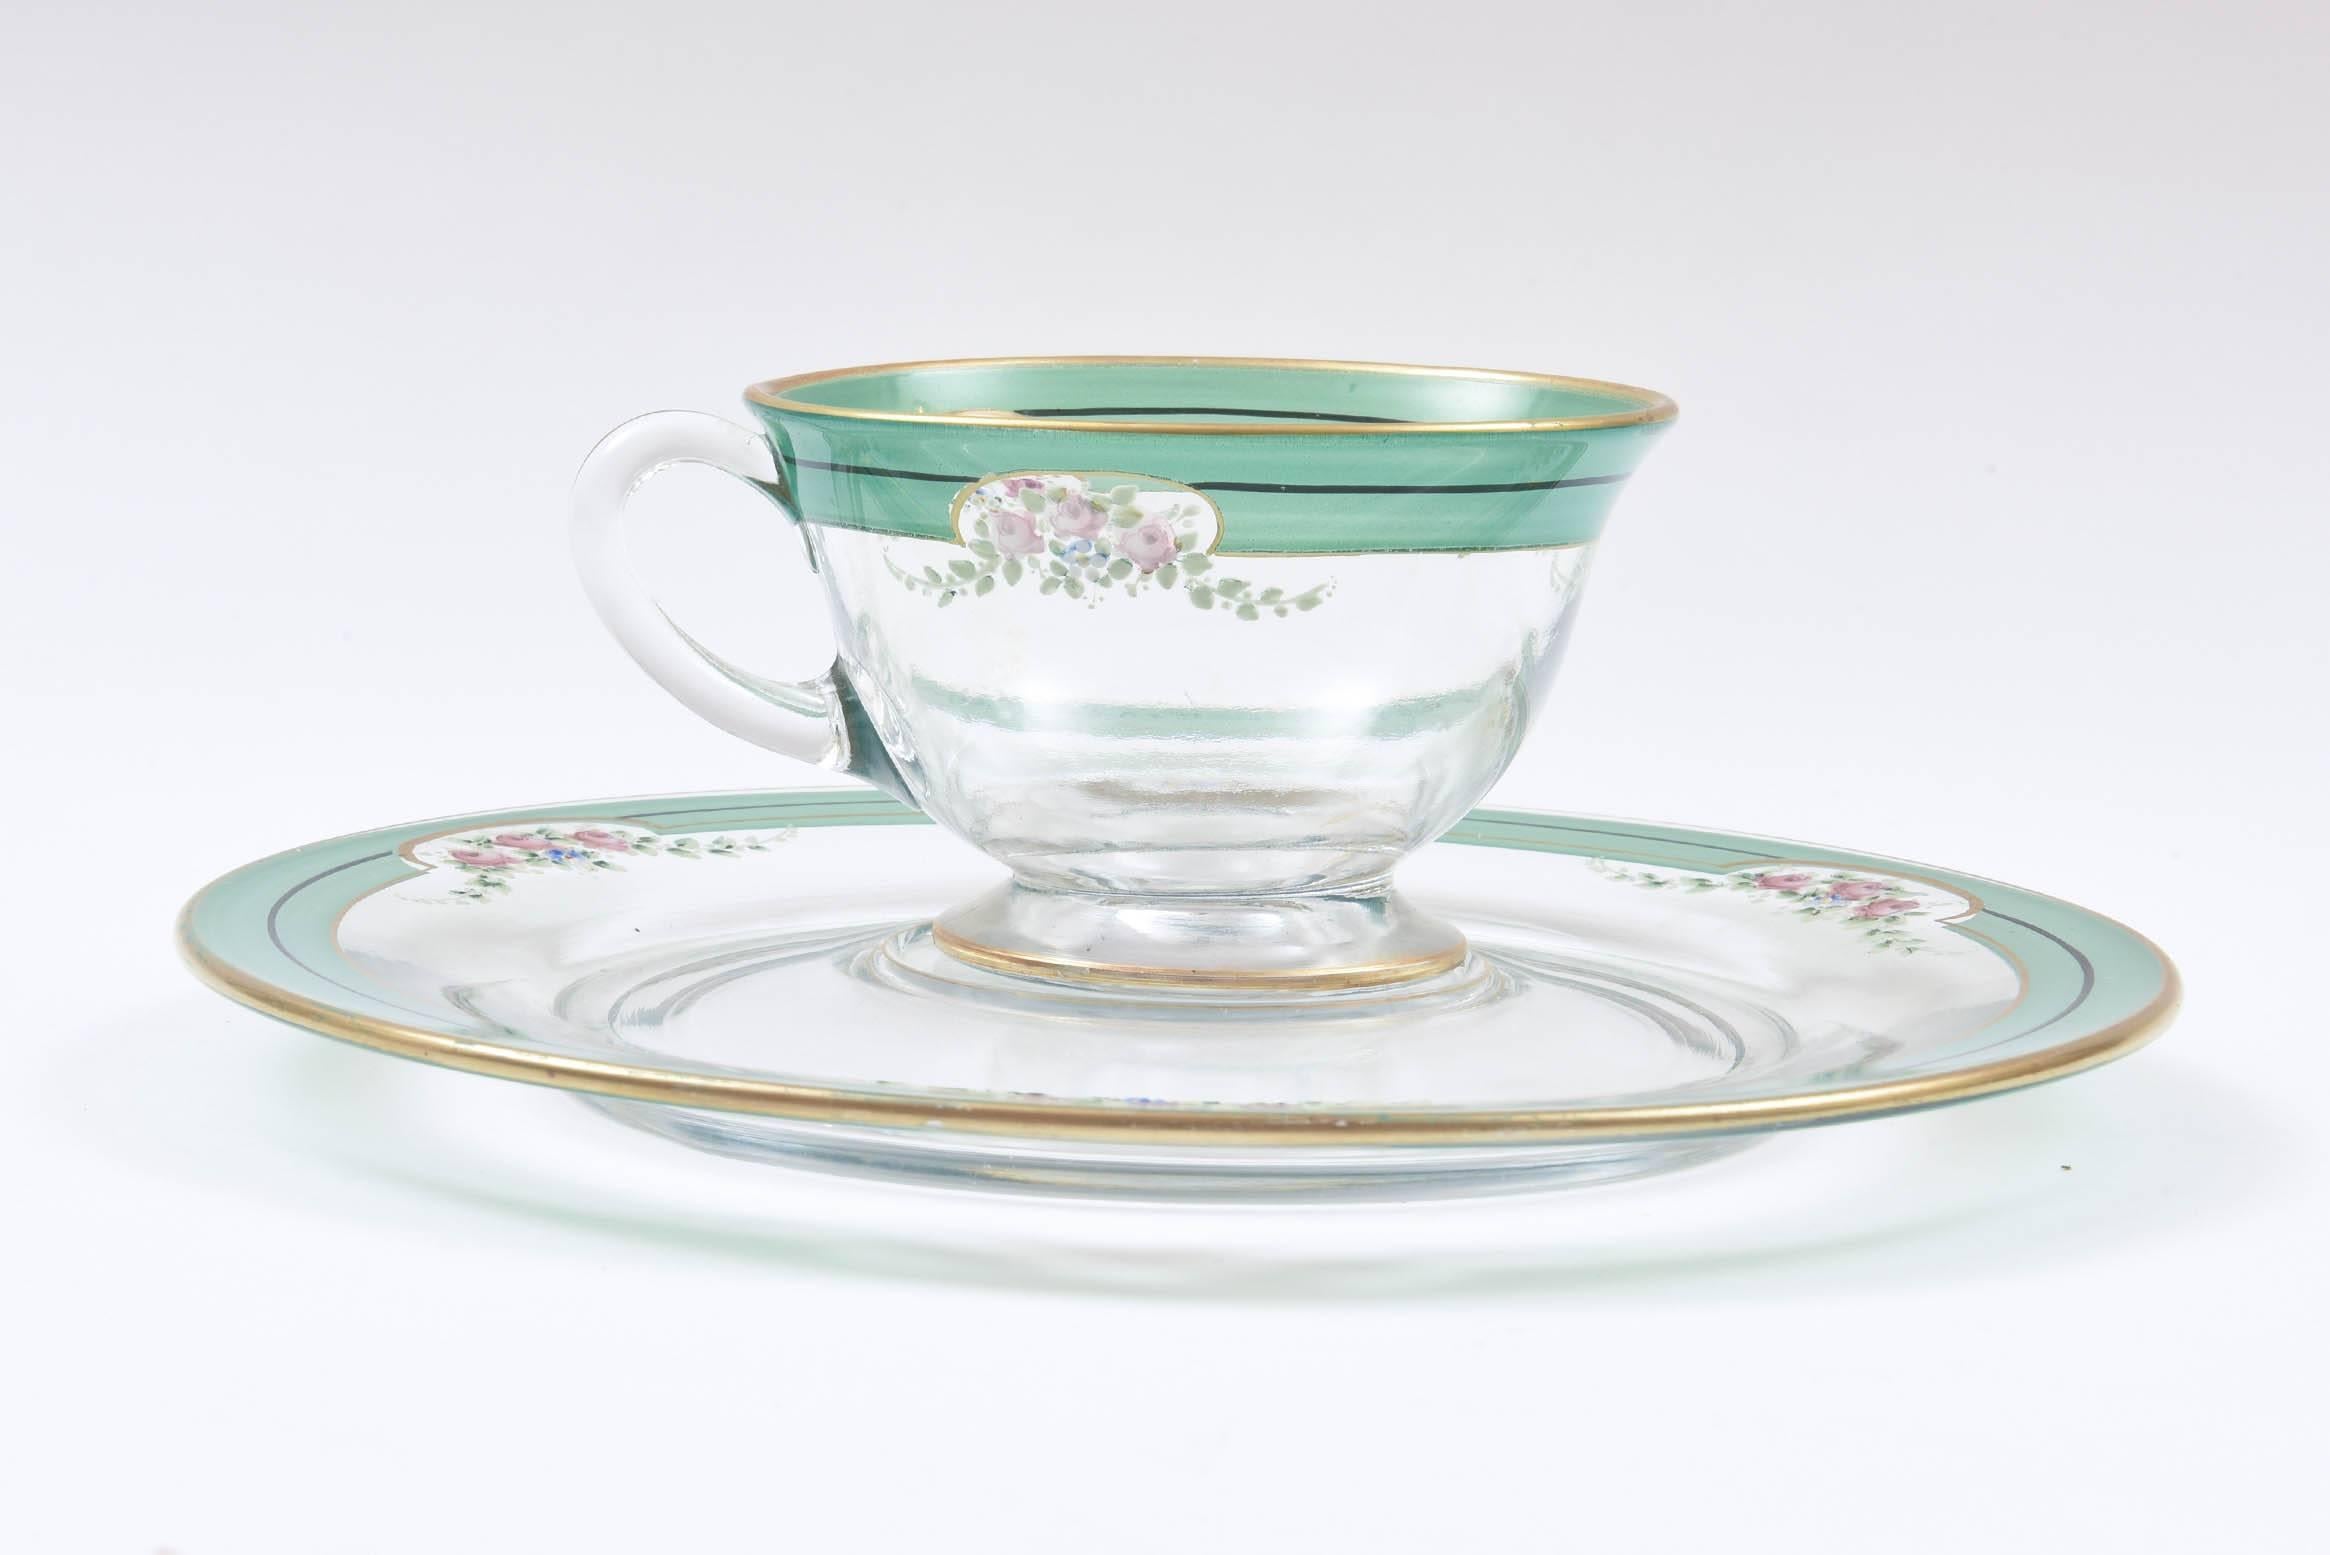 What a pretty and practical set of blown glass fitted dessert plates for their matching cups. Perfect for tea and toasts, desserts and tidbits. Trimmed in green with pastel pink floral sprays and gold trimmed. 24 pieces total: 12 plates and 12 cups.